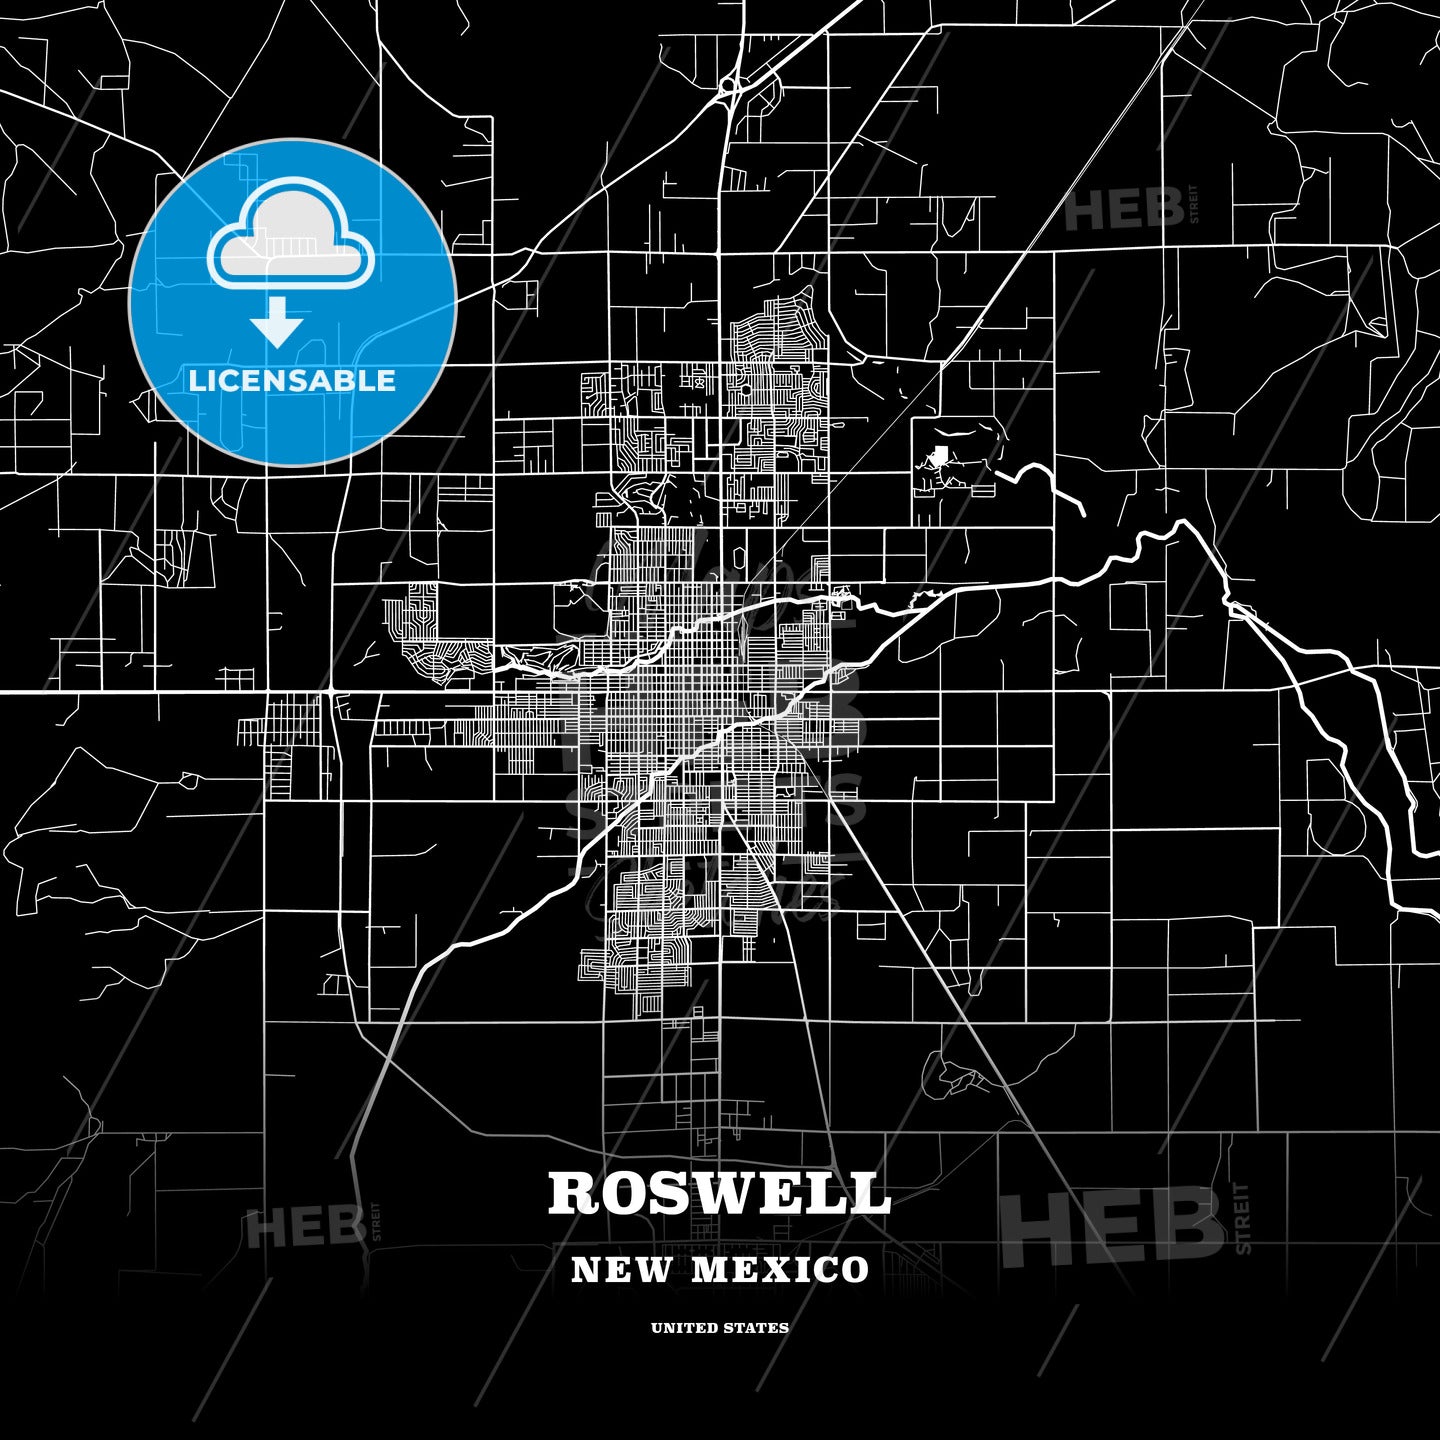 Roswell, New Mexico, USA map